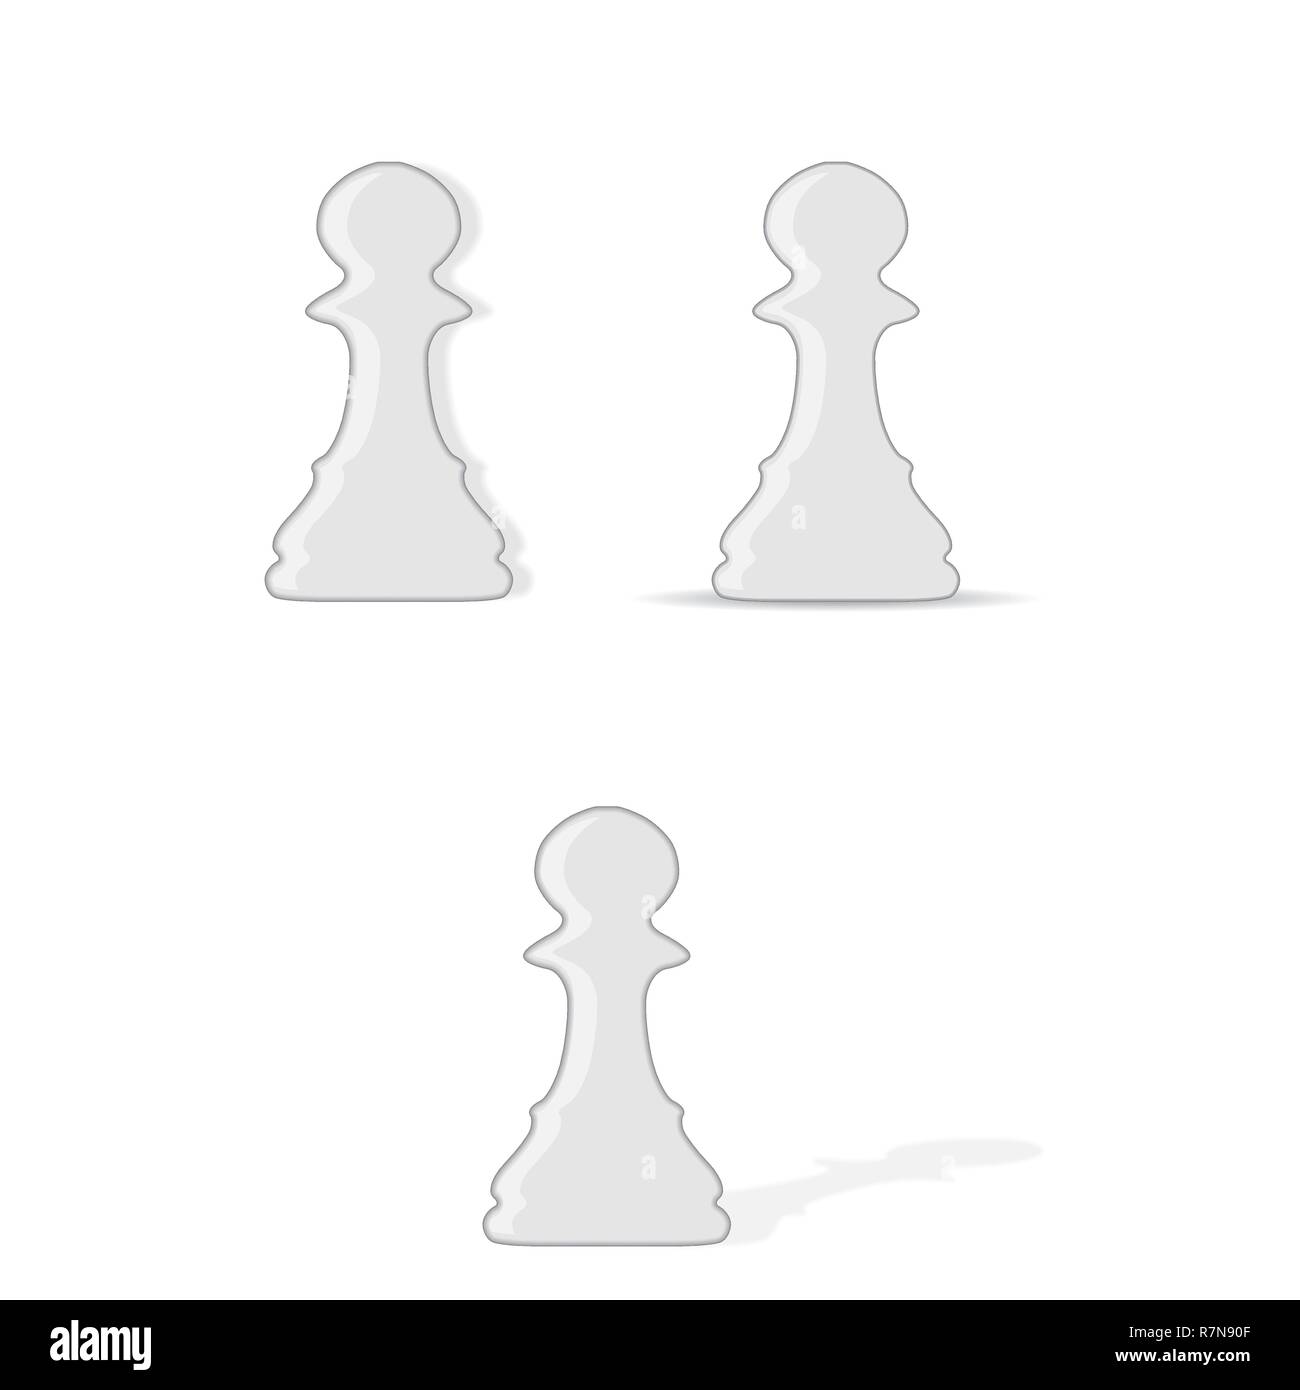 Chess pawns silhouettes with shadows isolated on white background Stock Vector